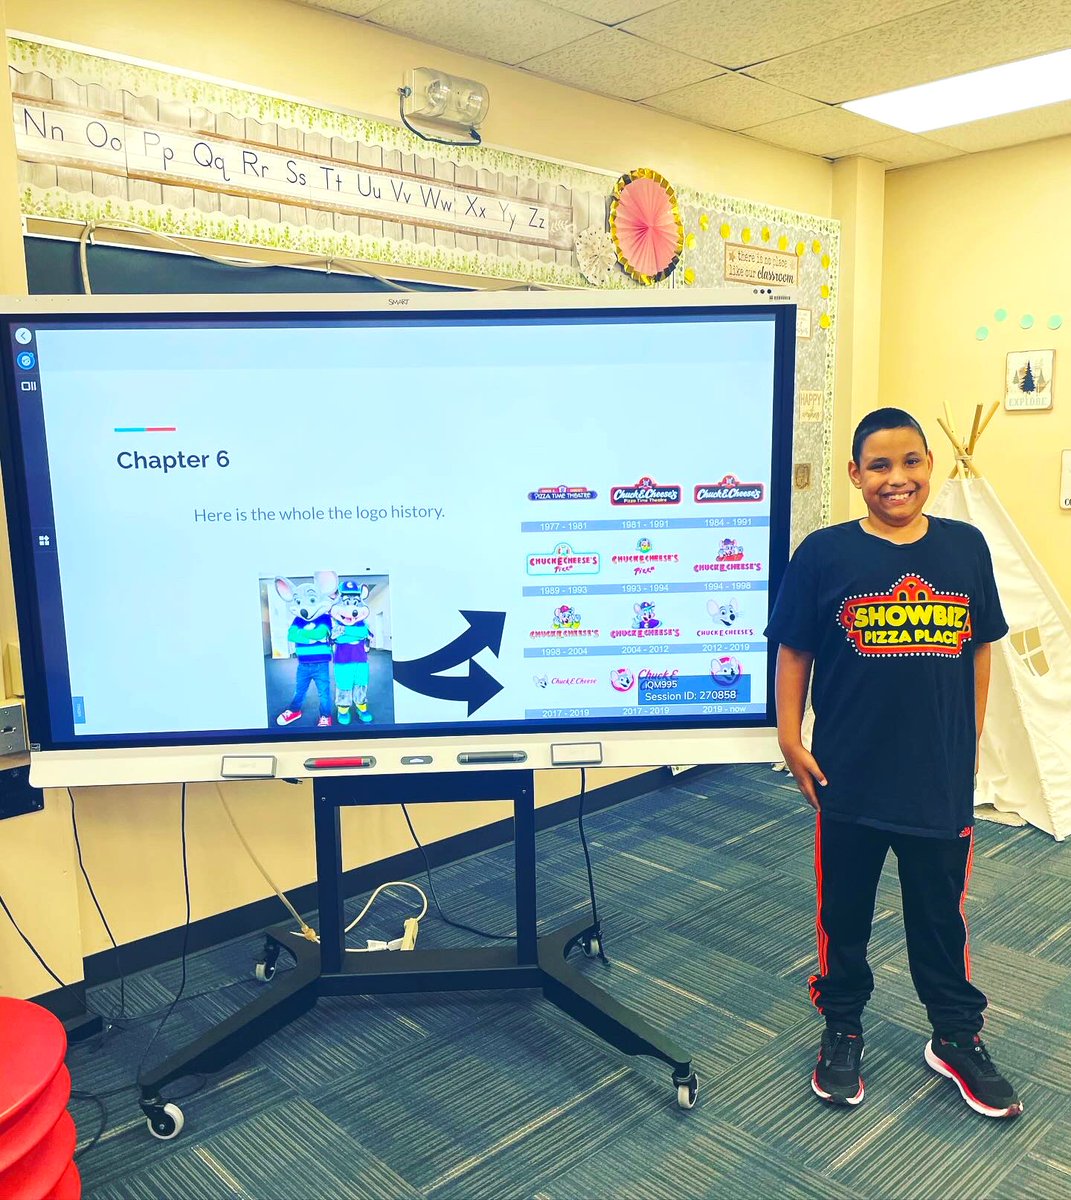 This student had a captive audience when he embraced our shared love of vintage establishments and provided a thorough PPT presentation on the subject of @ChuckECheese.

Passion, personalization, & pizza. 

#JoyfulLeaders #KidsDeserveIt